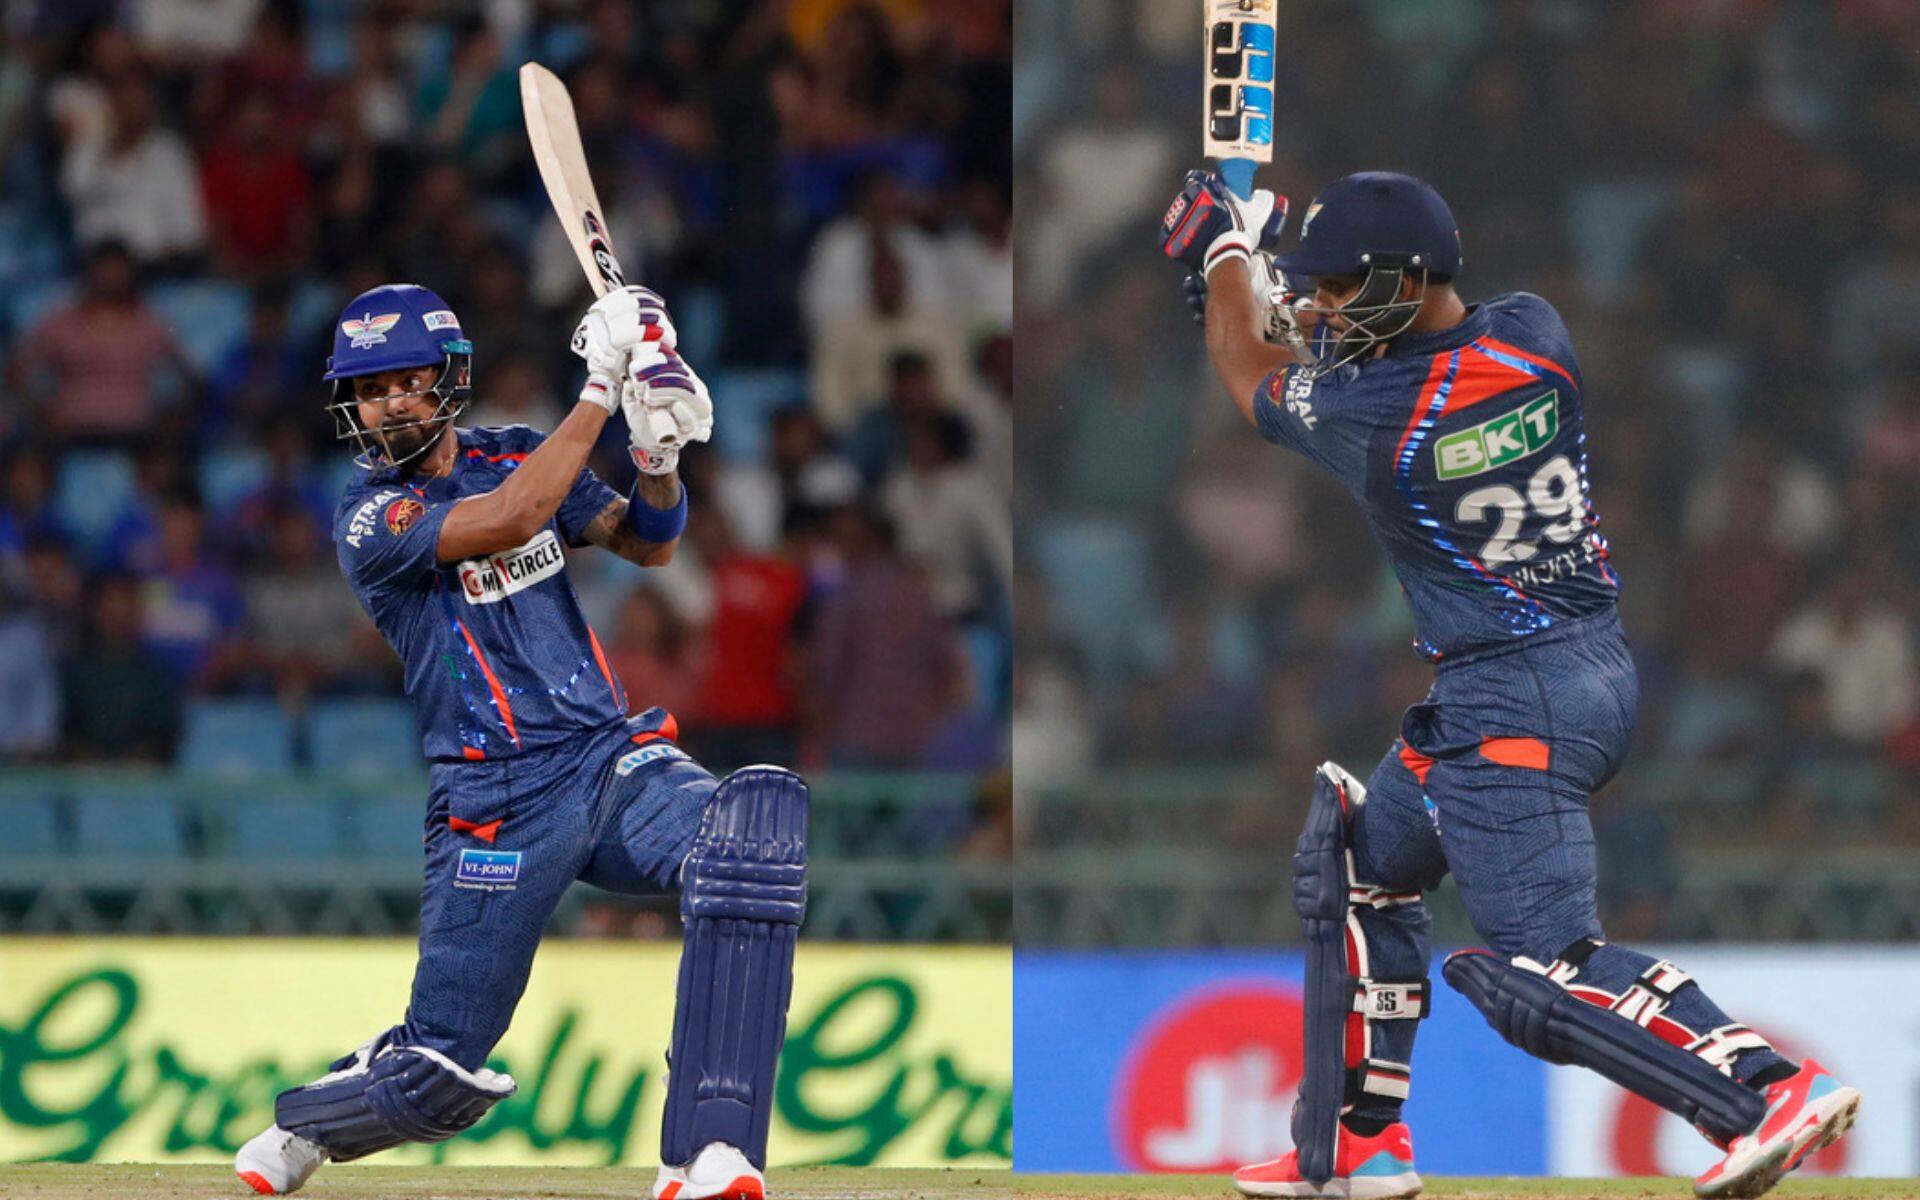 KL Rahul and Nicholas Pooran will be important for LSG in the game [AP Photos]